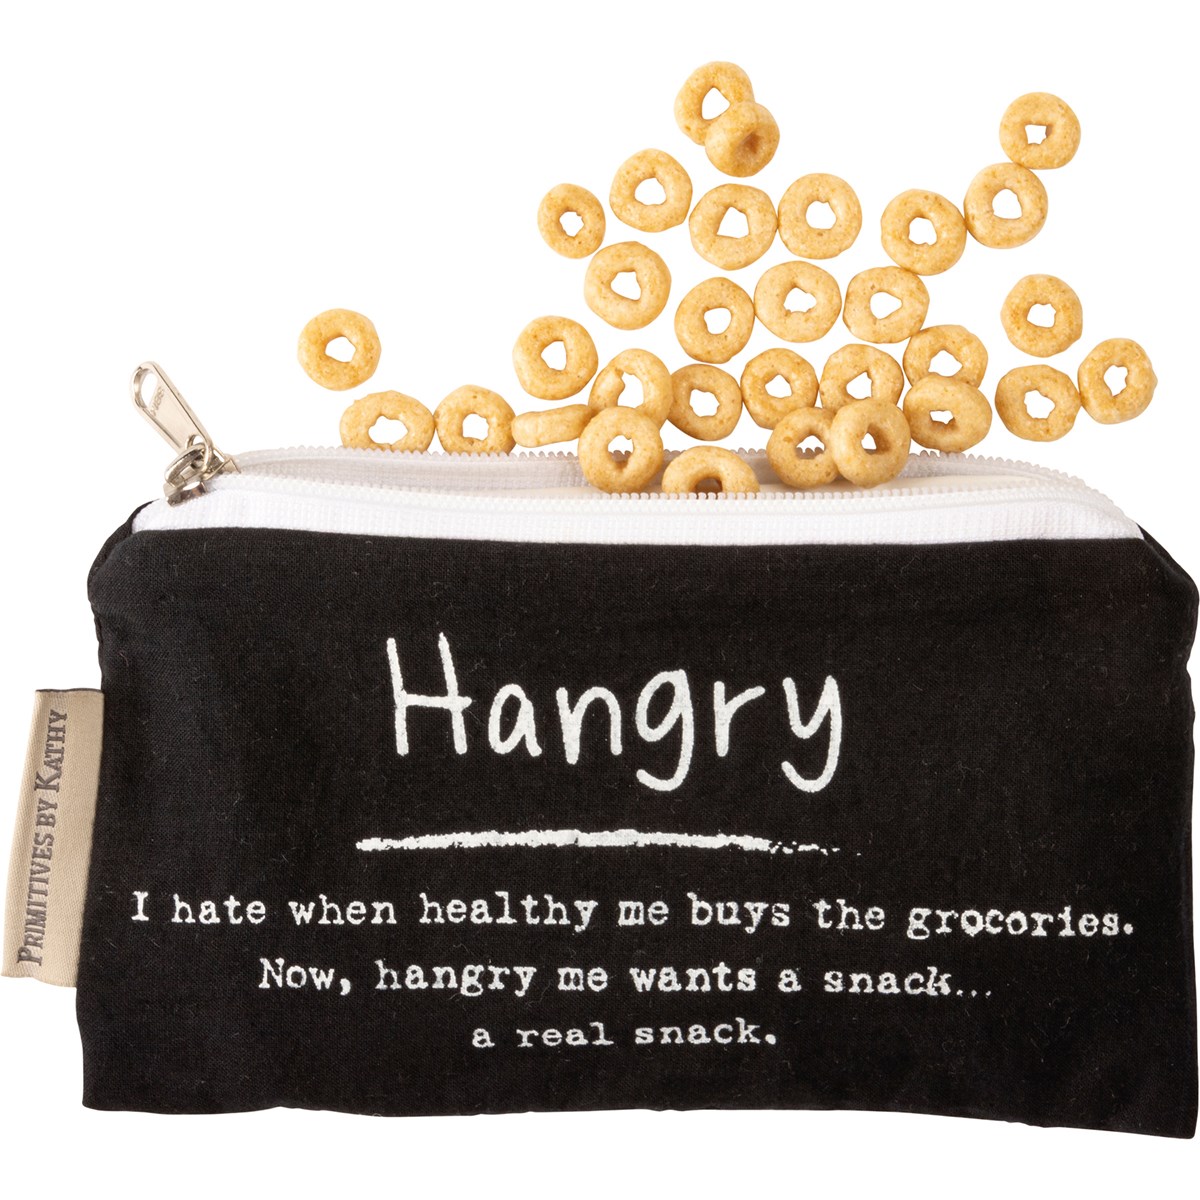 Everything Pouch Set - Hangry & Snacks - 7" x 3.50" - Cotton, Faux Leather, Metal